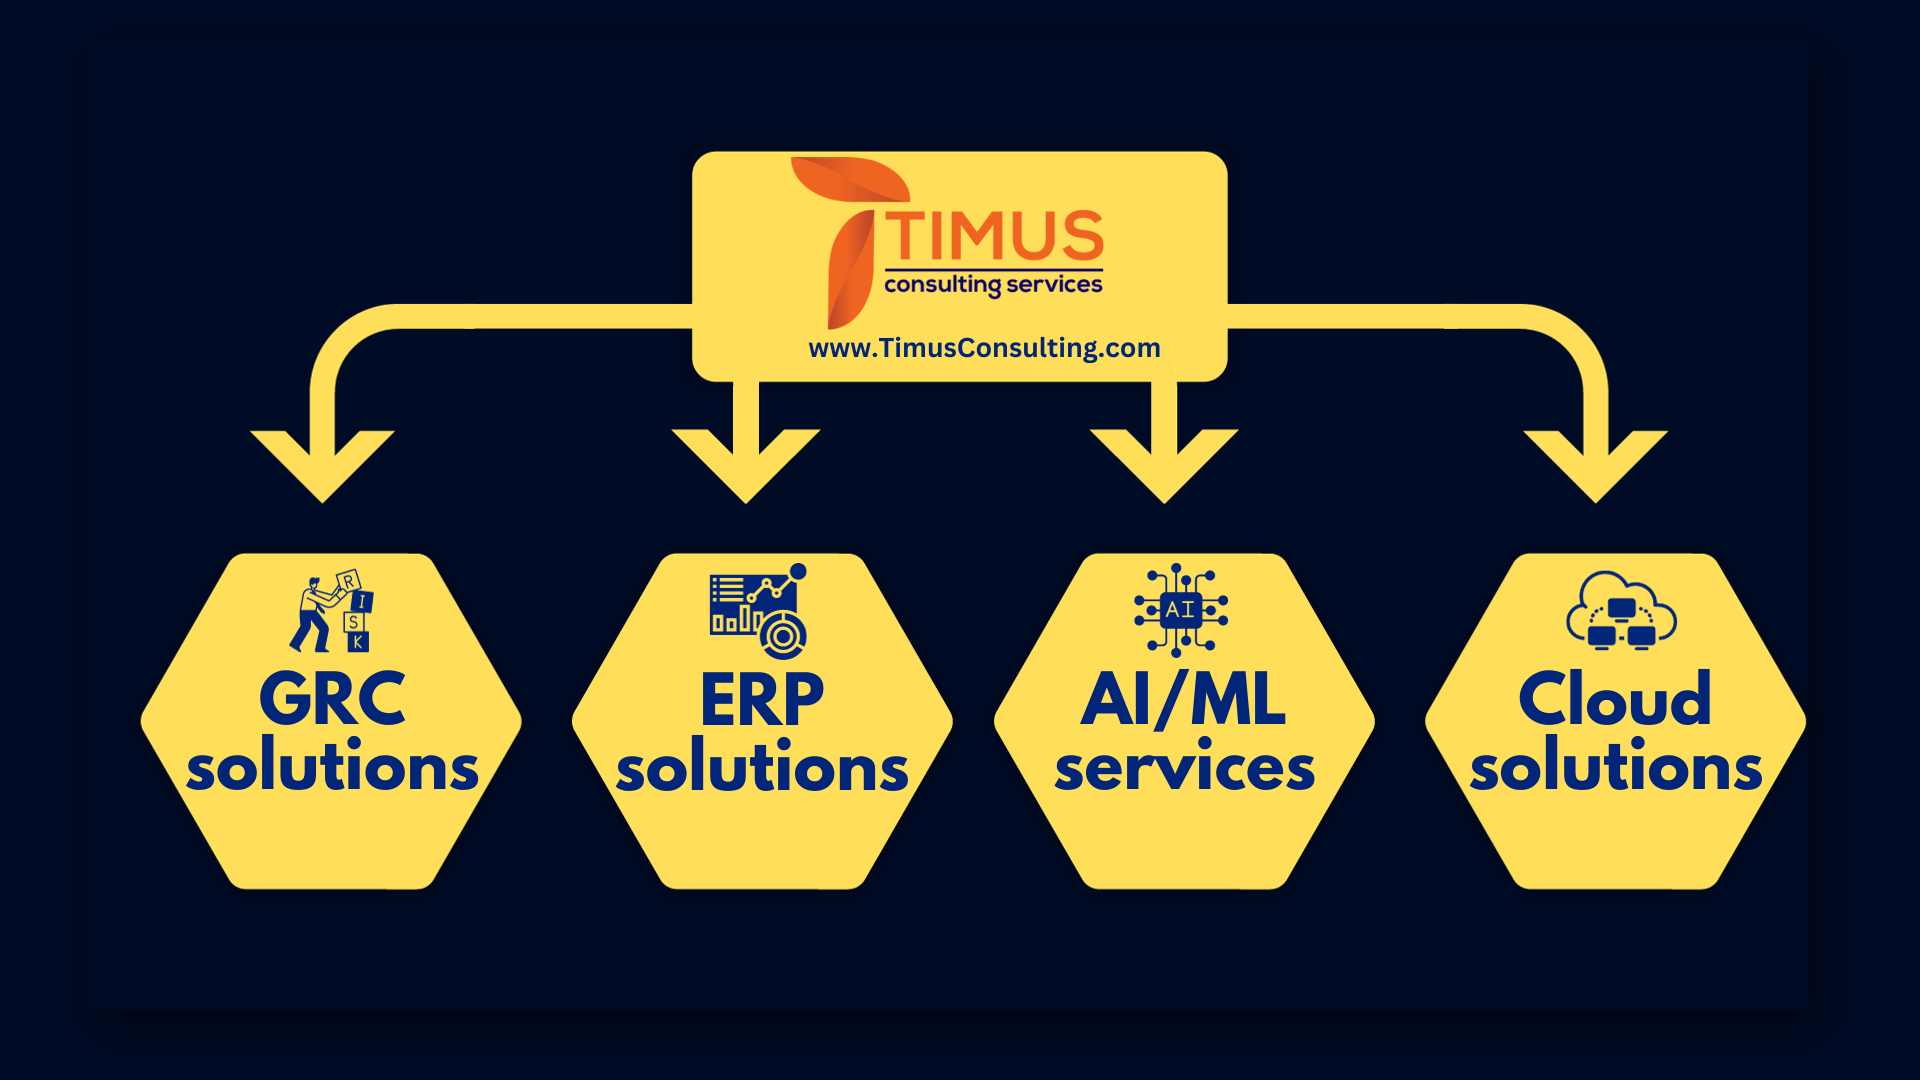 Join Our Webinar: “The Important Features of a High Tech GRC Solution” by Timus Consulting Services